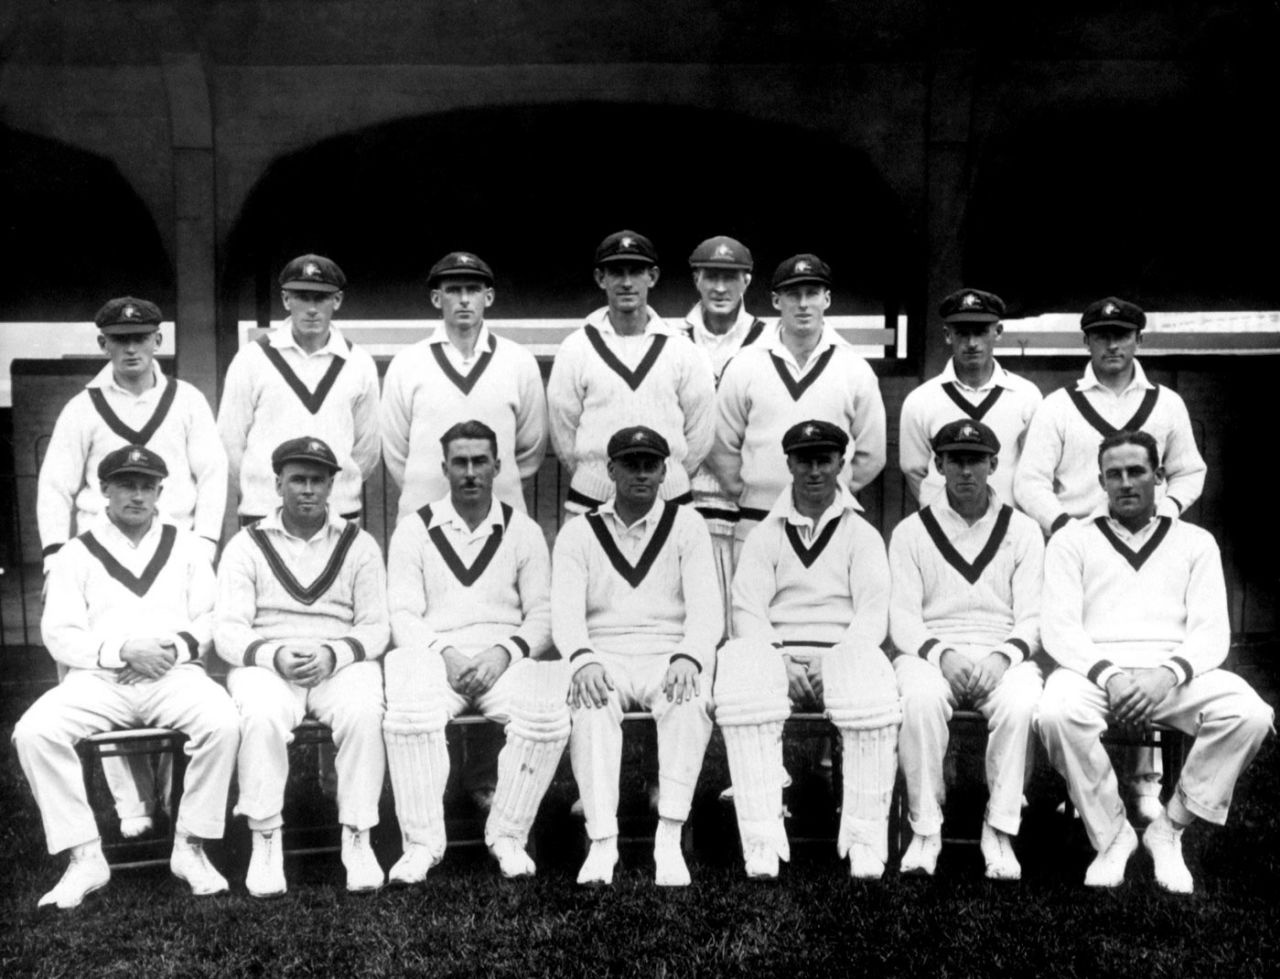 The Australian 1930 Ashes tourists. Back row (left to right): Stan McCabe, Alec Hurwood, Tim Wall, Percy Hornibrook, Alan Kippax, Ted a'Beckett, Clarrie Grimmett, Bert Oldfield; Front row: Don Bradman, Bill Ponsford, Vic Richardson, Bill Woodfull, Charlie Walker, Archie Jackson, Alan Fairfax, May 9, 1930